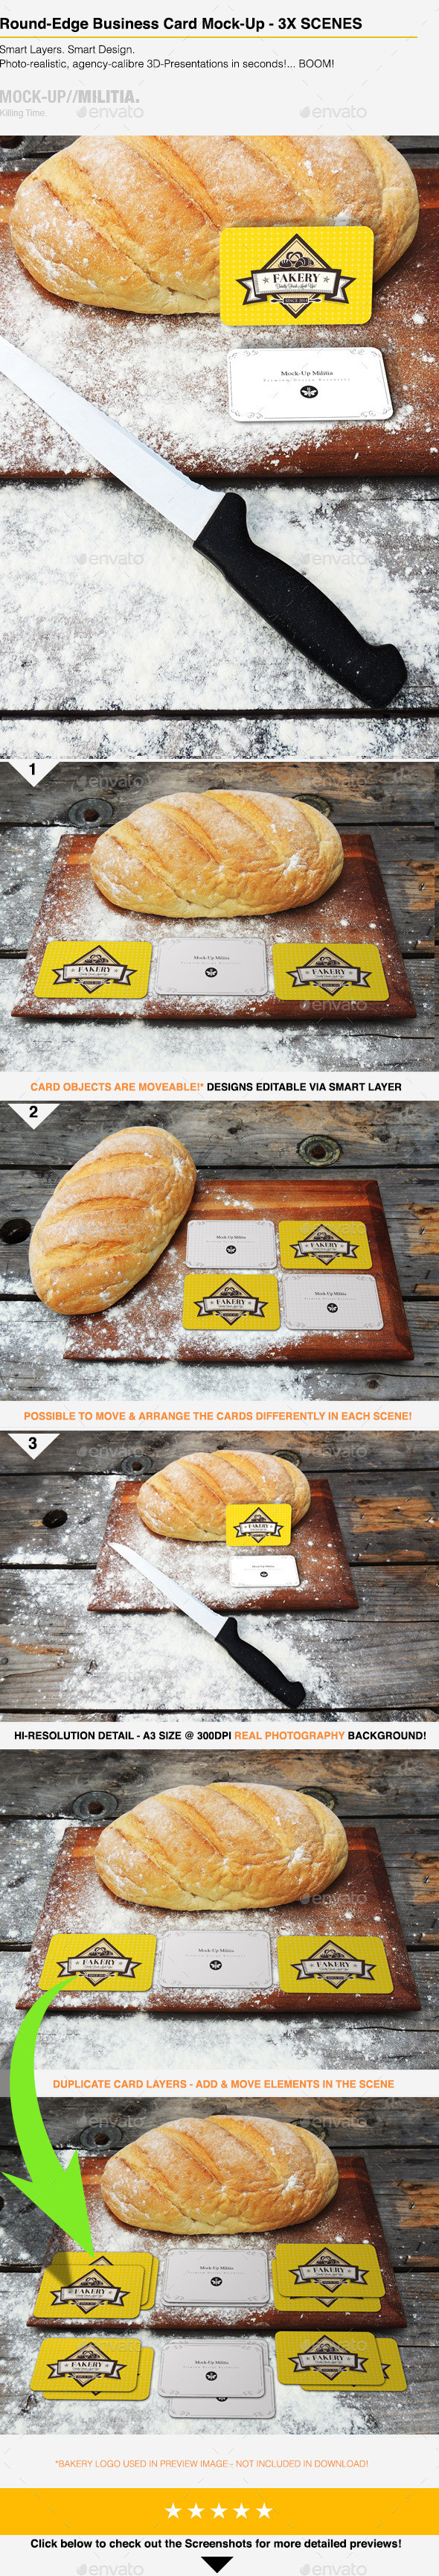 Mm bakery business card mock up 85mmx55mm 6mm rounded corners prvw